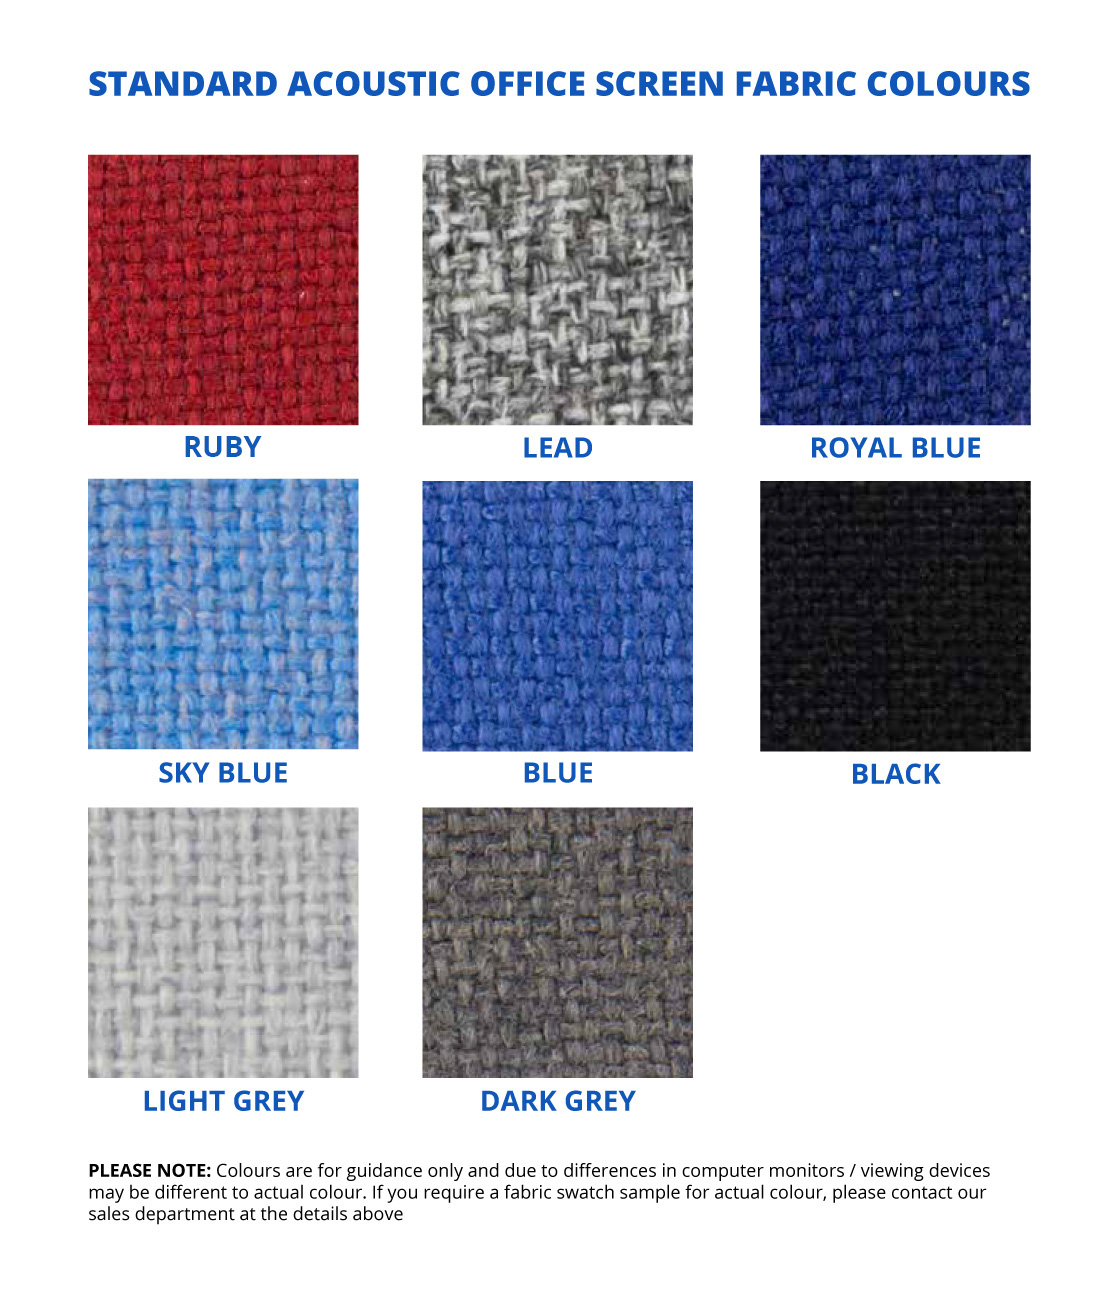 Standard Acoustic Office Screen Fabric Colours